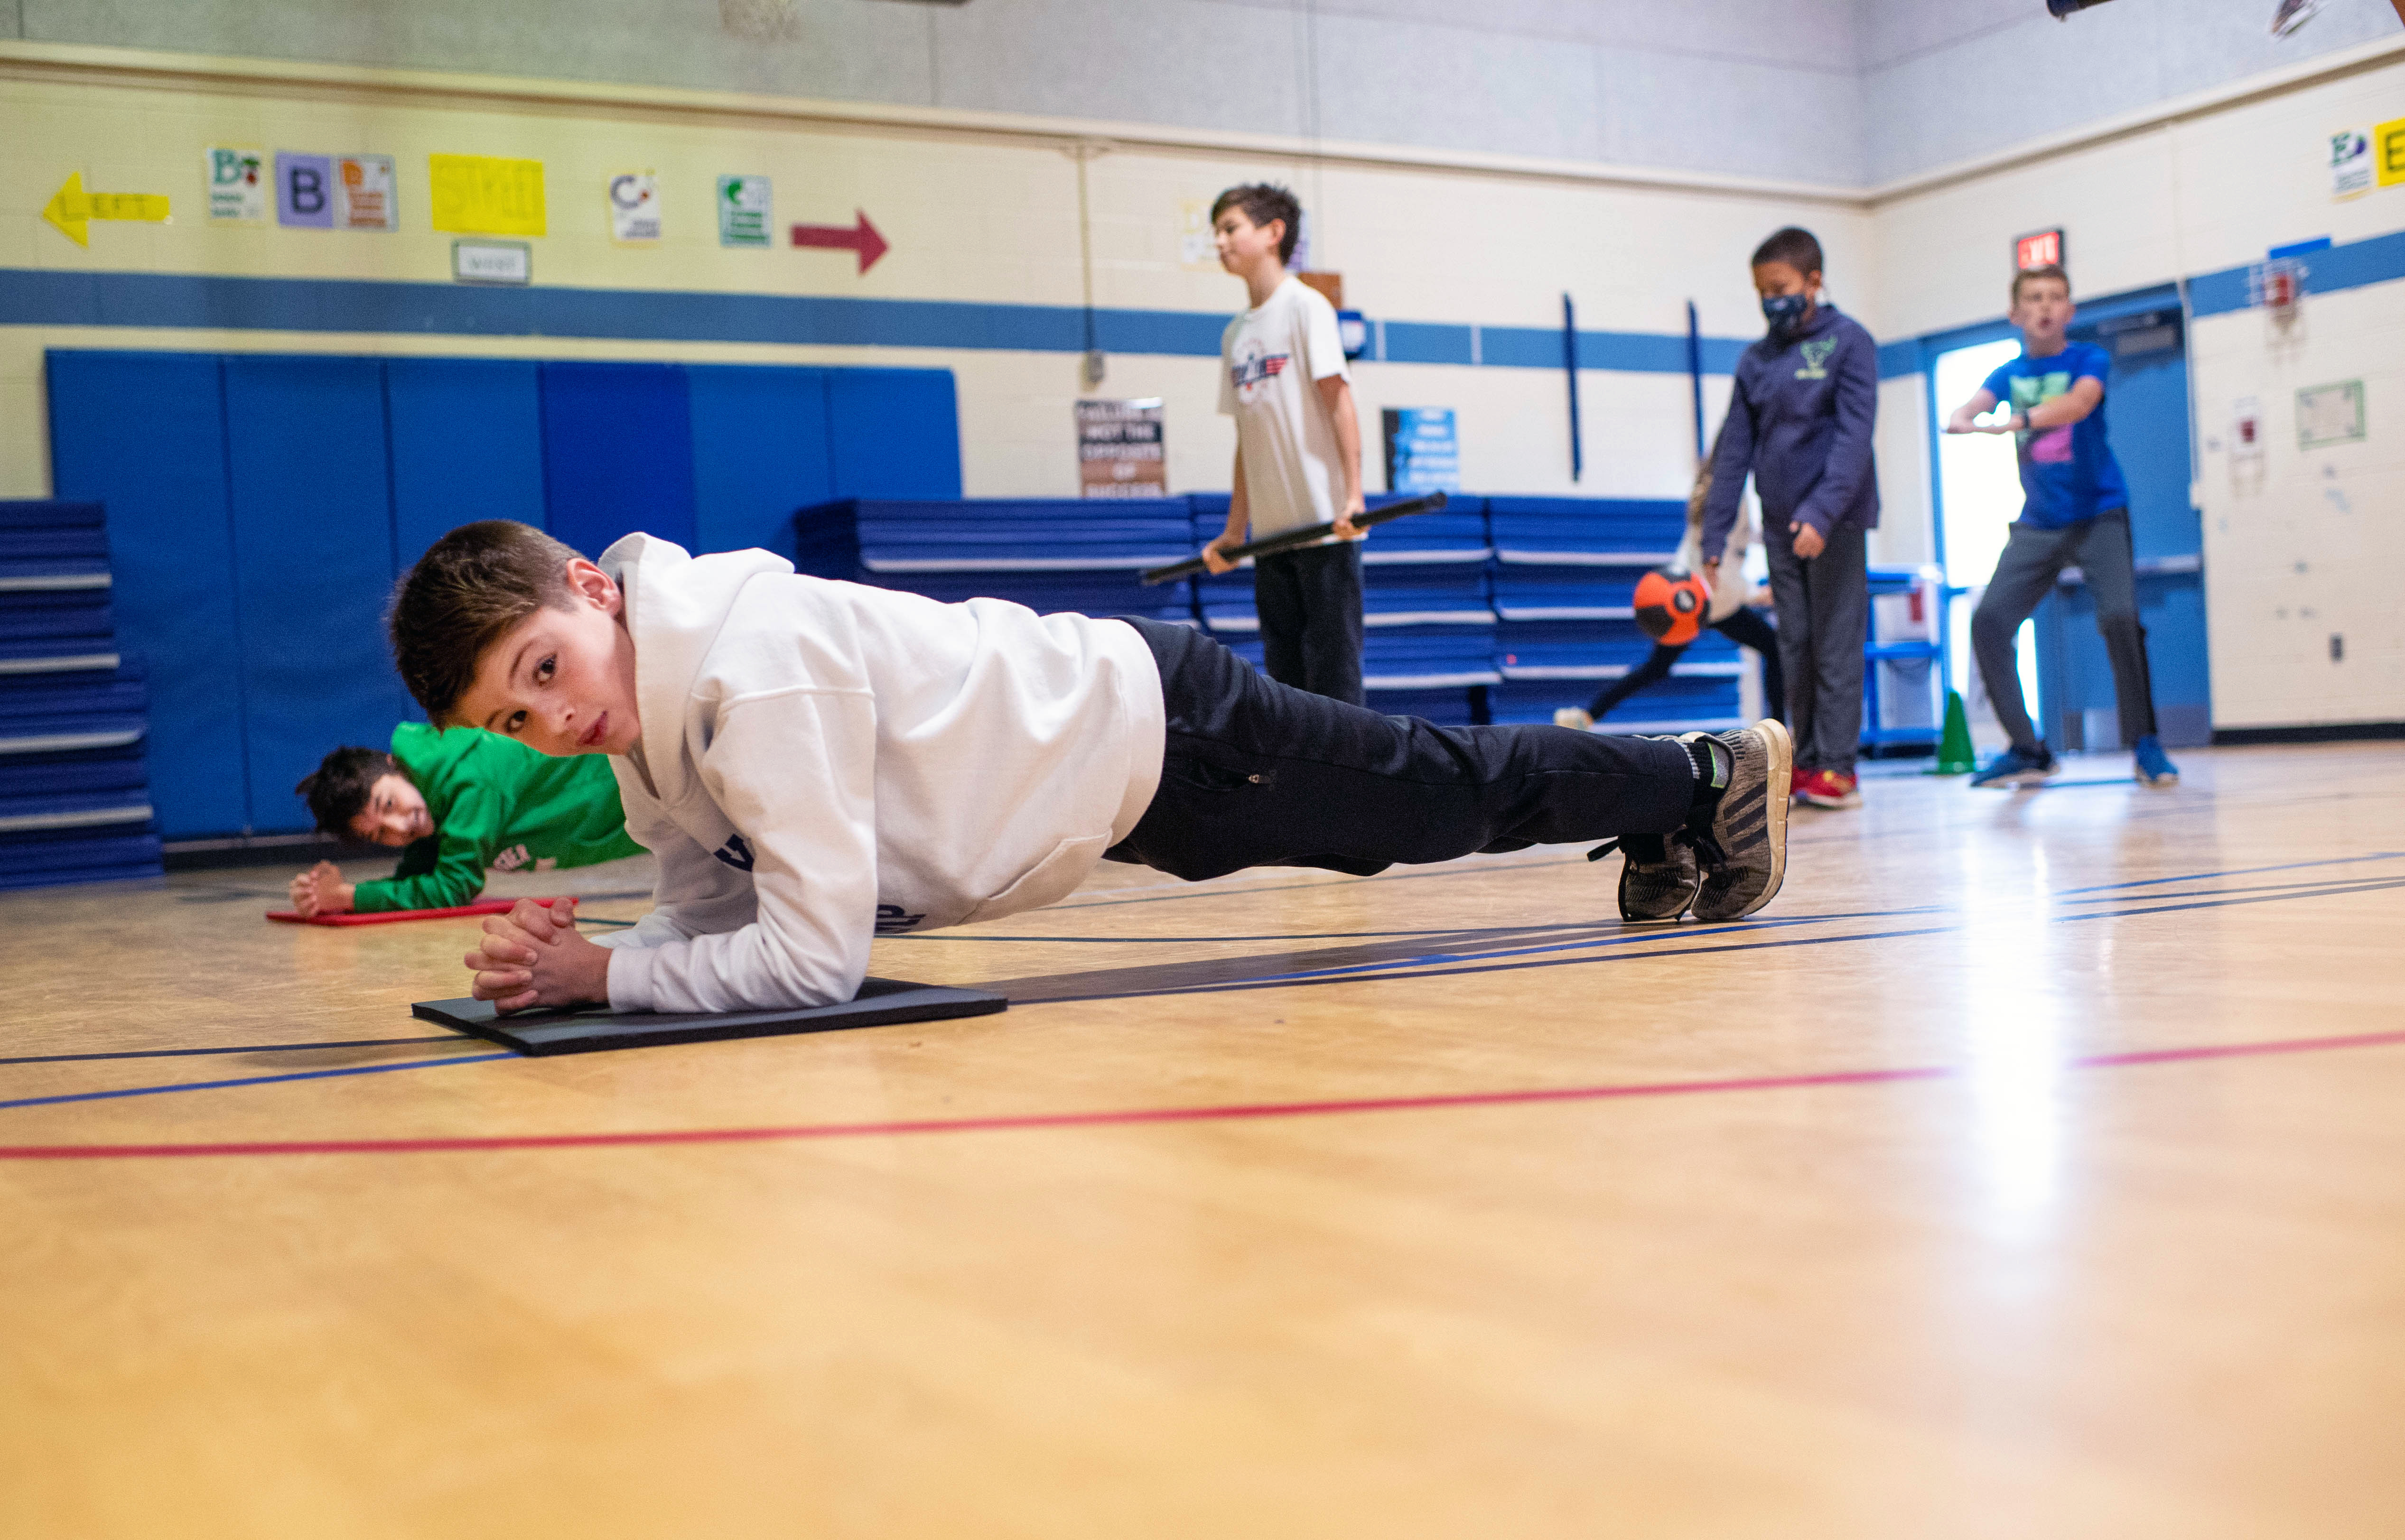 A student holds a plank pose during a Fitness Warrior morning workout at Chesterbrook Elementary in McLean, Va.